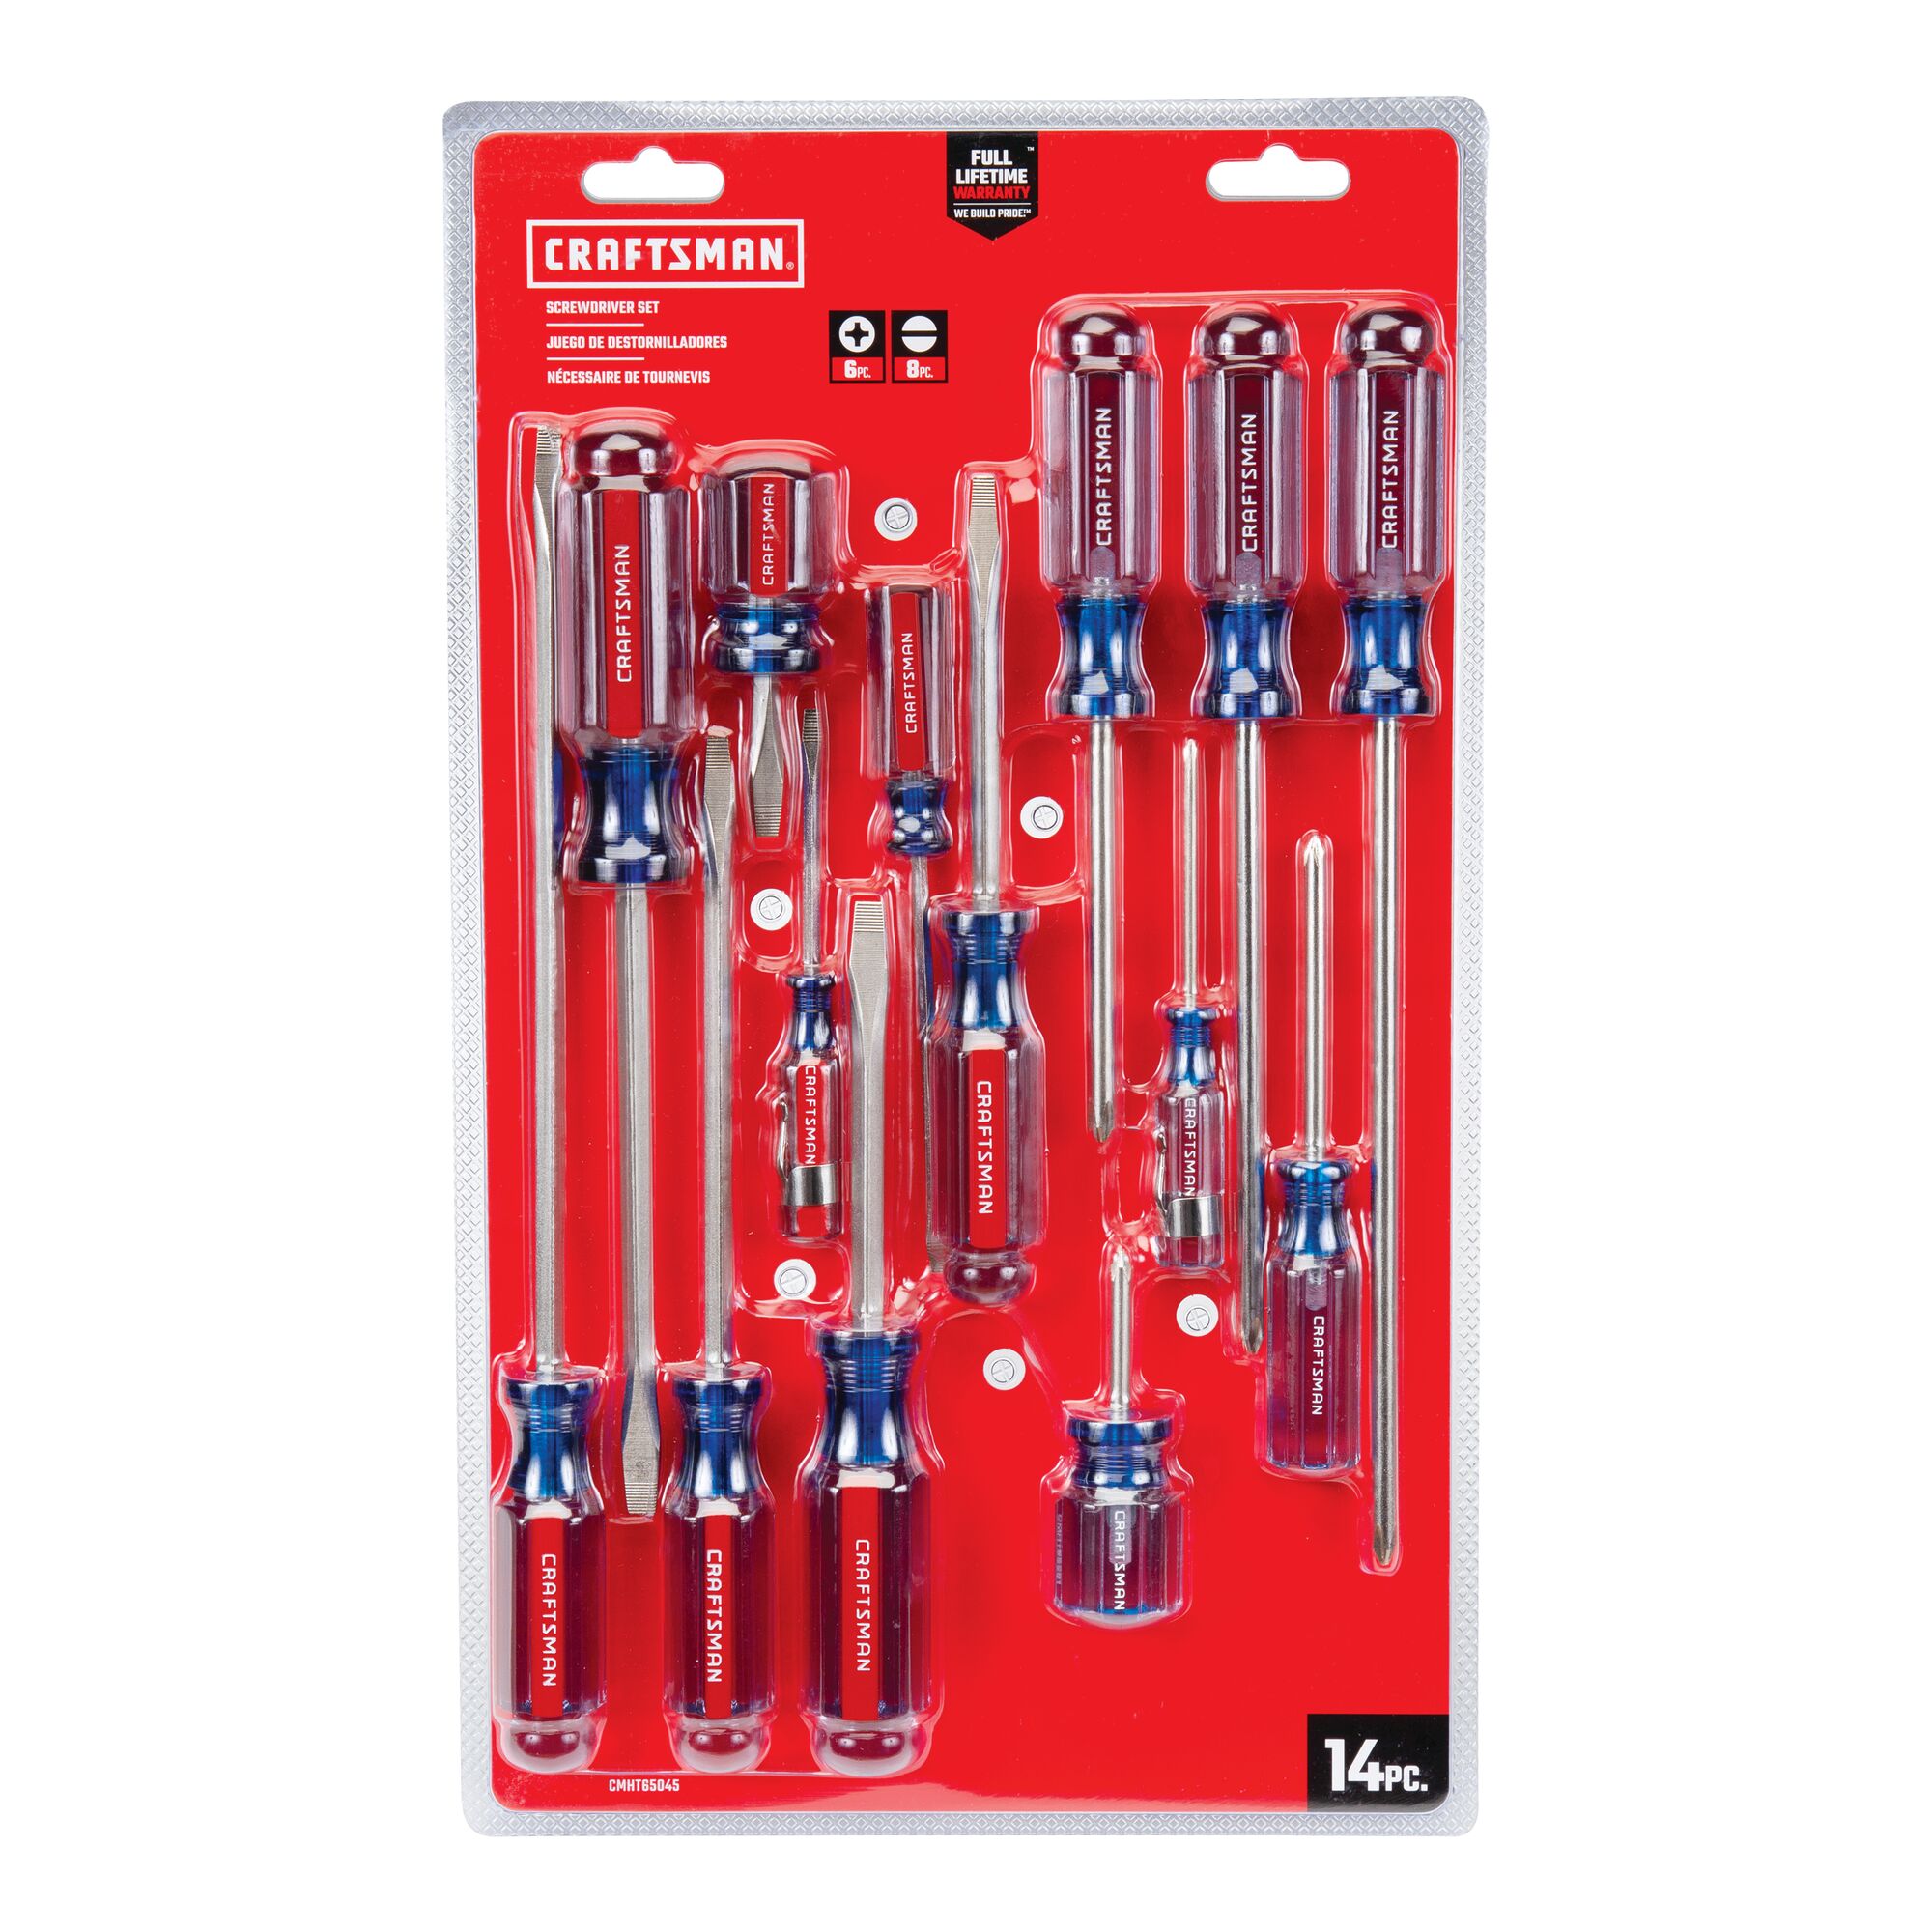 14 Piece Acetate ScrewDriver Set in carded packaging.